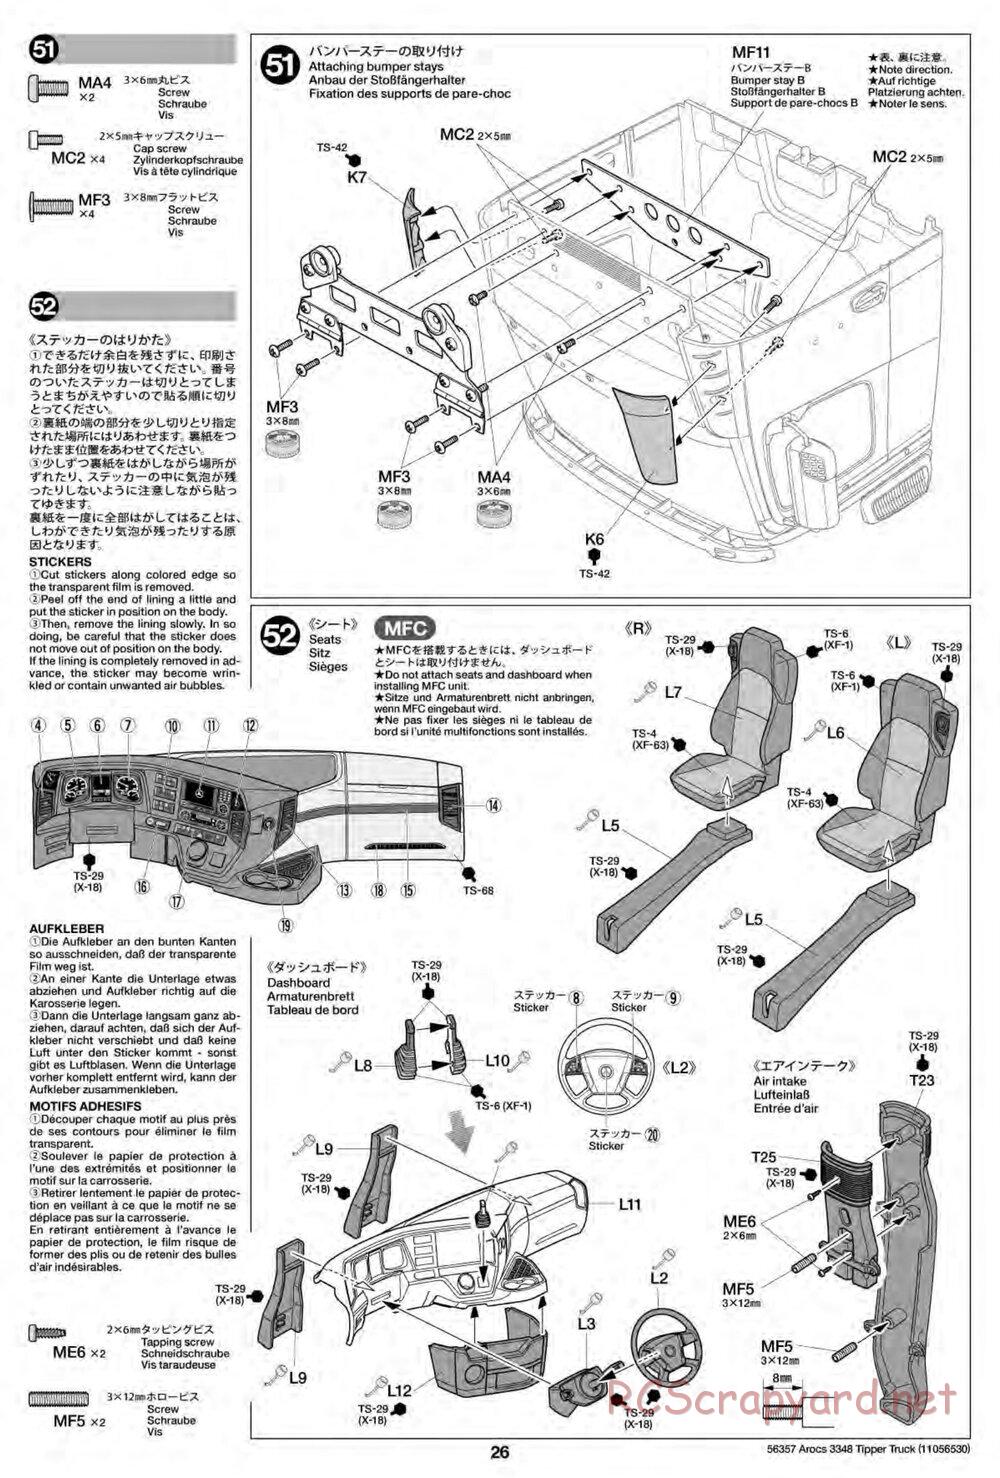 Tamiya - Mercedes-Benz Arocs 3348 6x4 Tipper Truck Chassis - Manual - Page 26